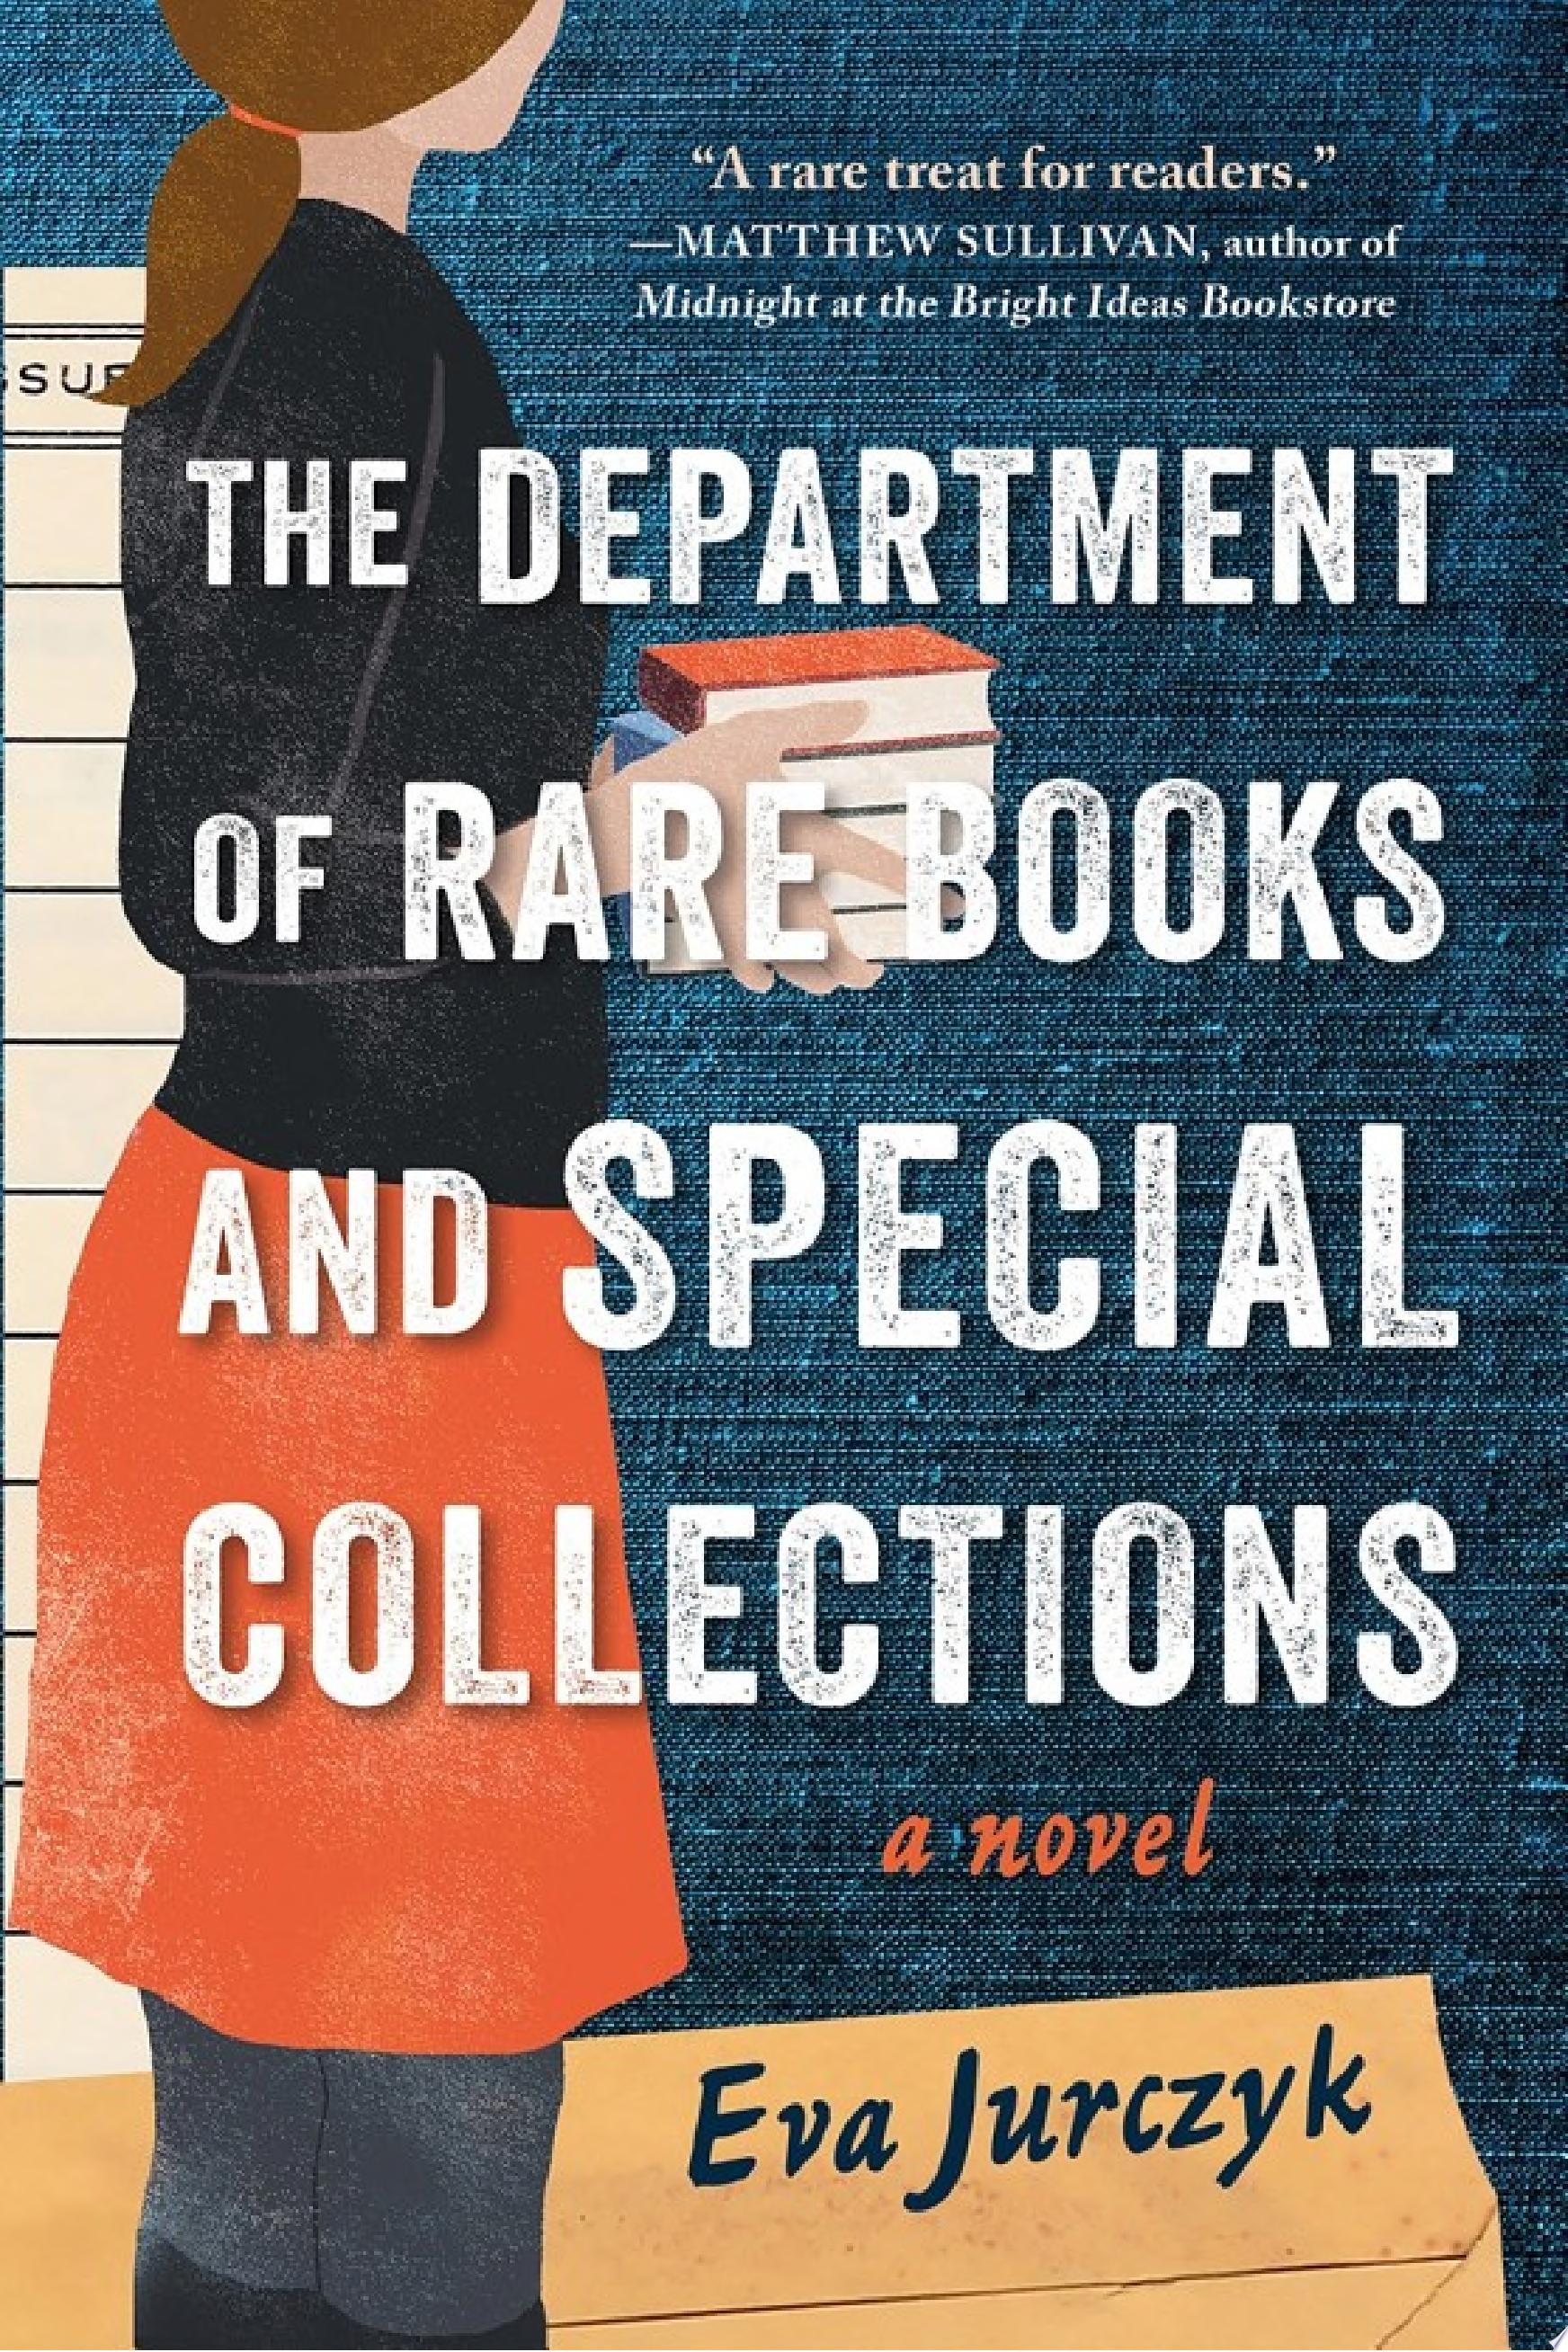 Image for "The Department of Rare Books and Special Collections"